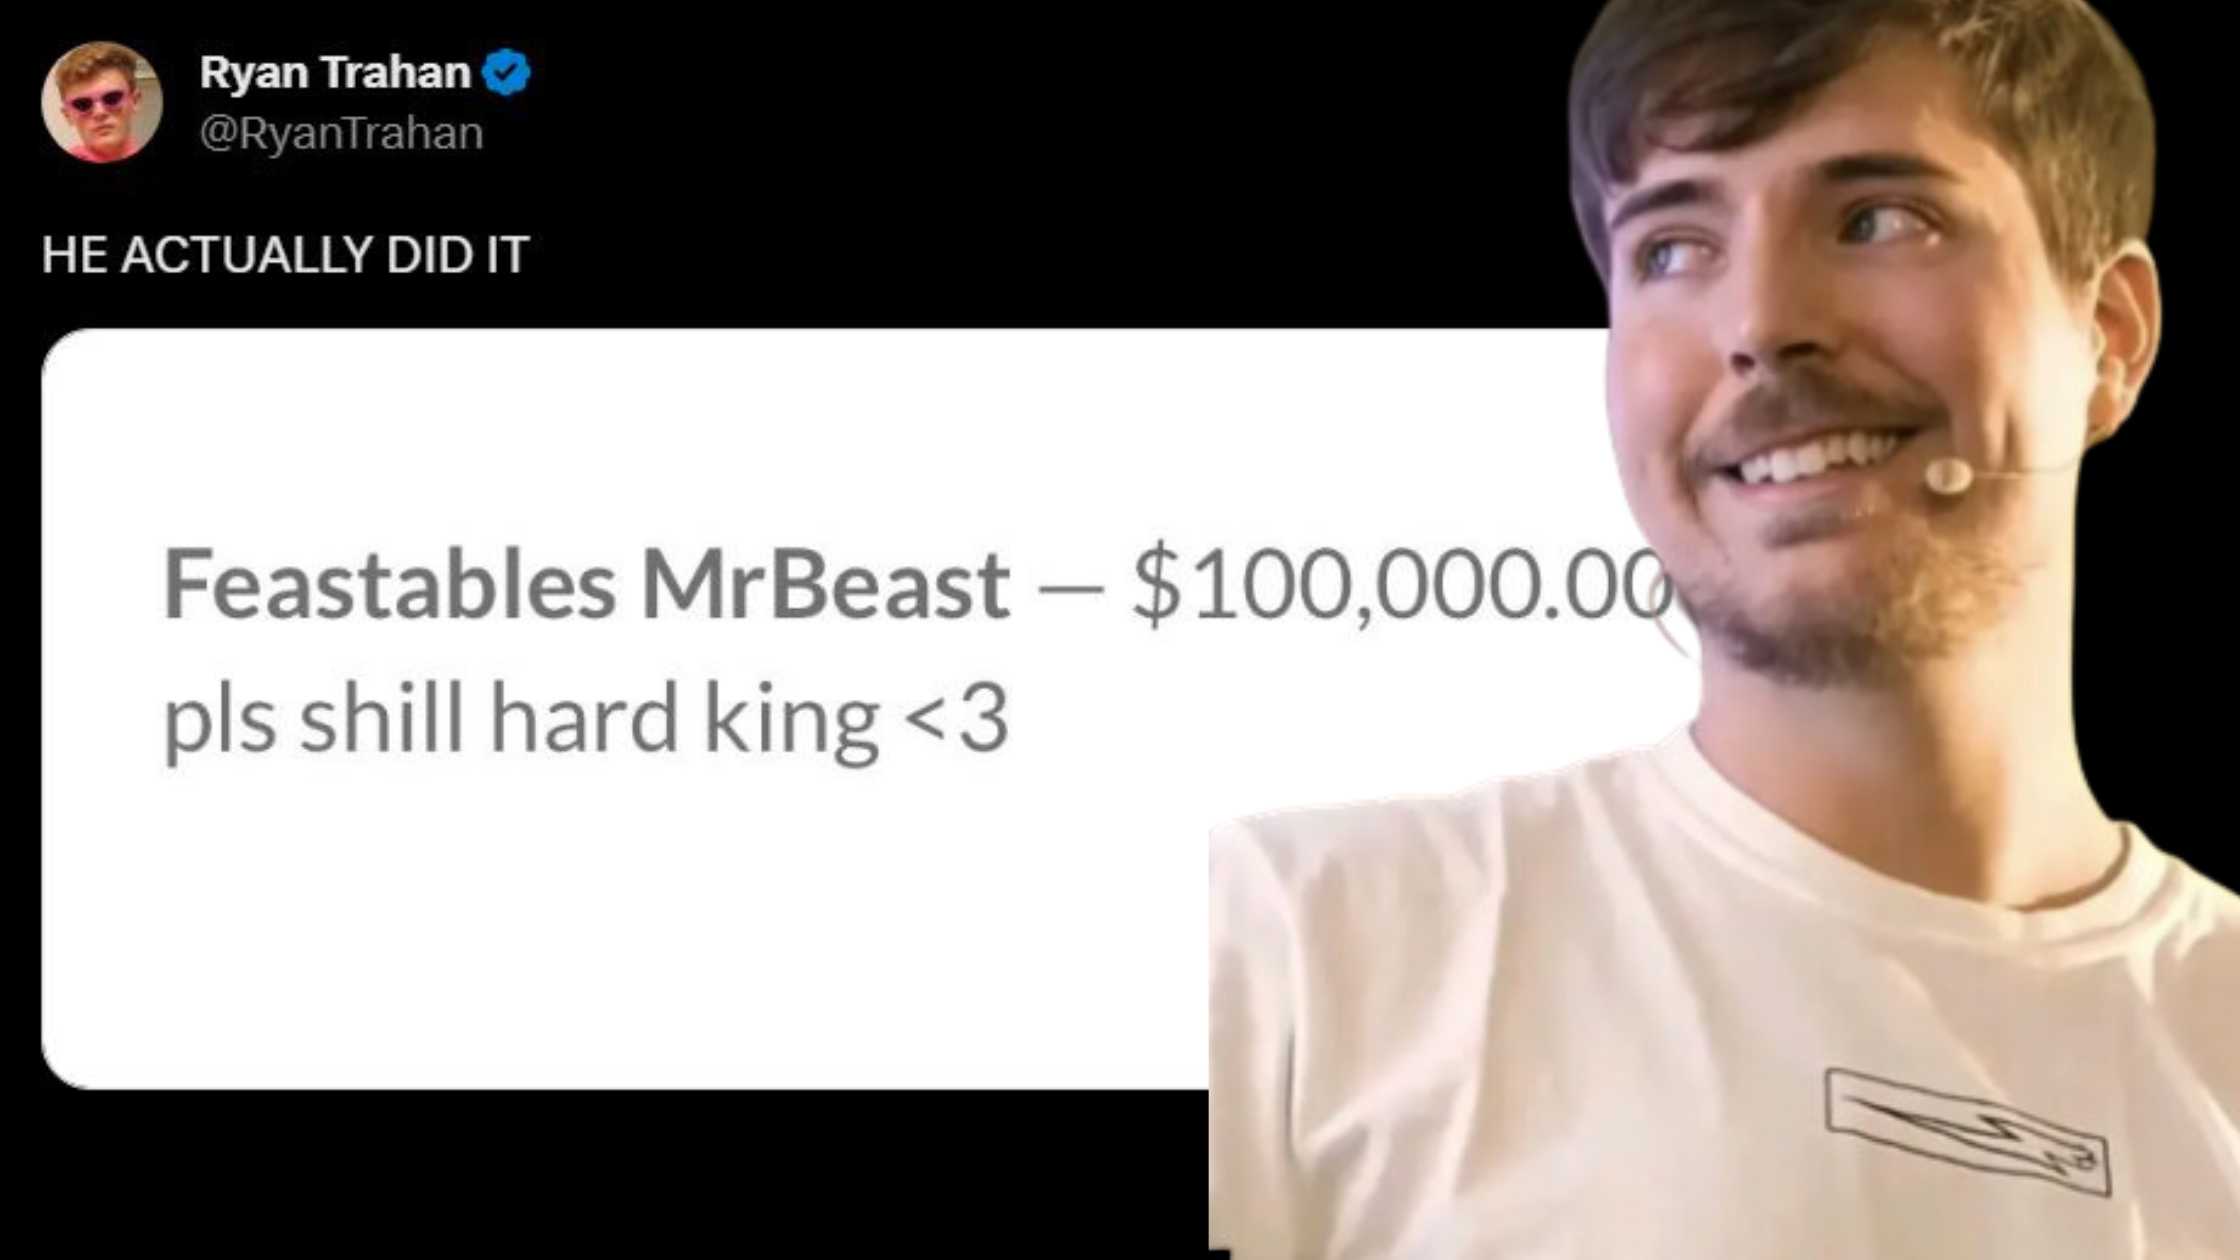 MrBeast's Incredible $100,000 Donation and its Impact on Philanthropy and Feastables Sales